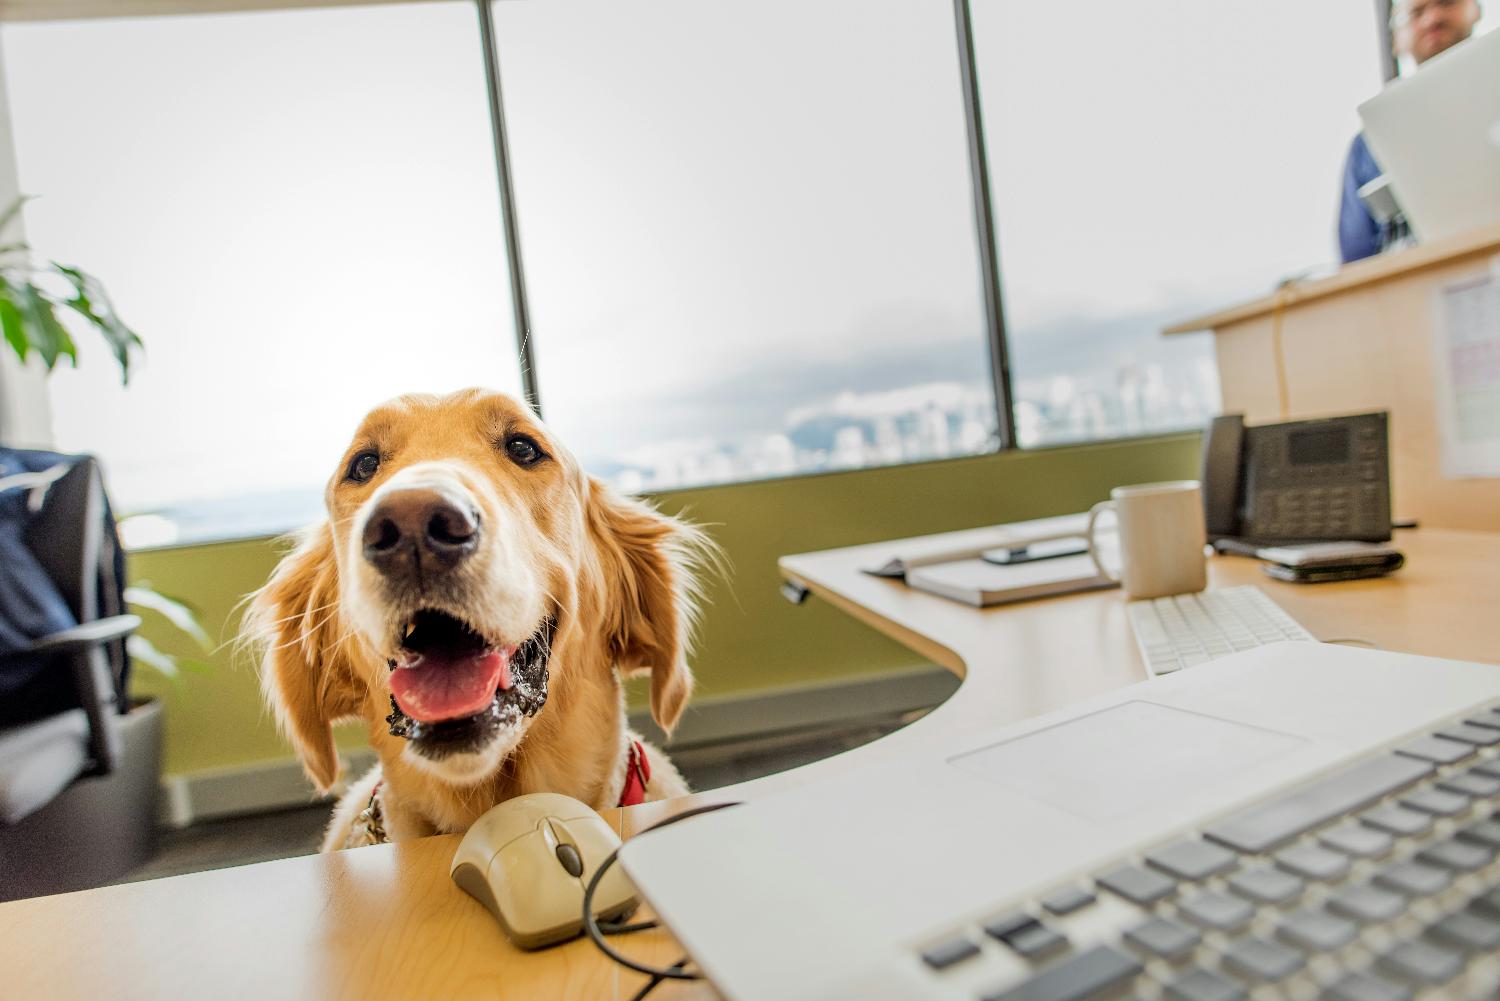 At Zymeworks, we offer a flexible work environment. Bring your pets to work and enjoy our monthly half-day Fridays!